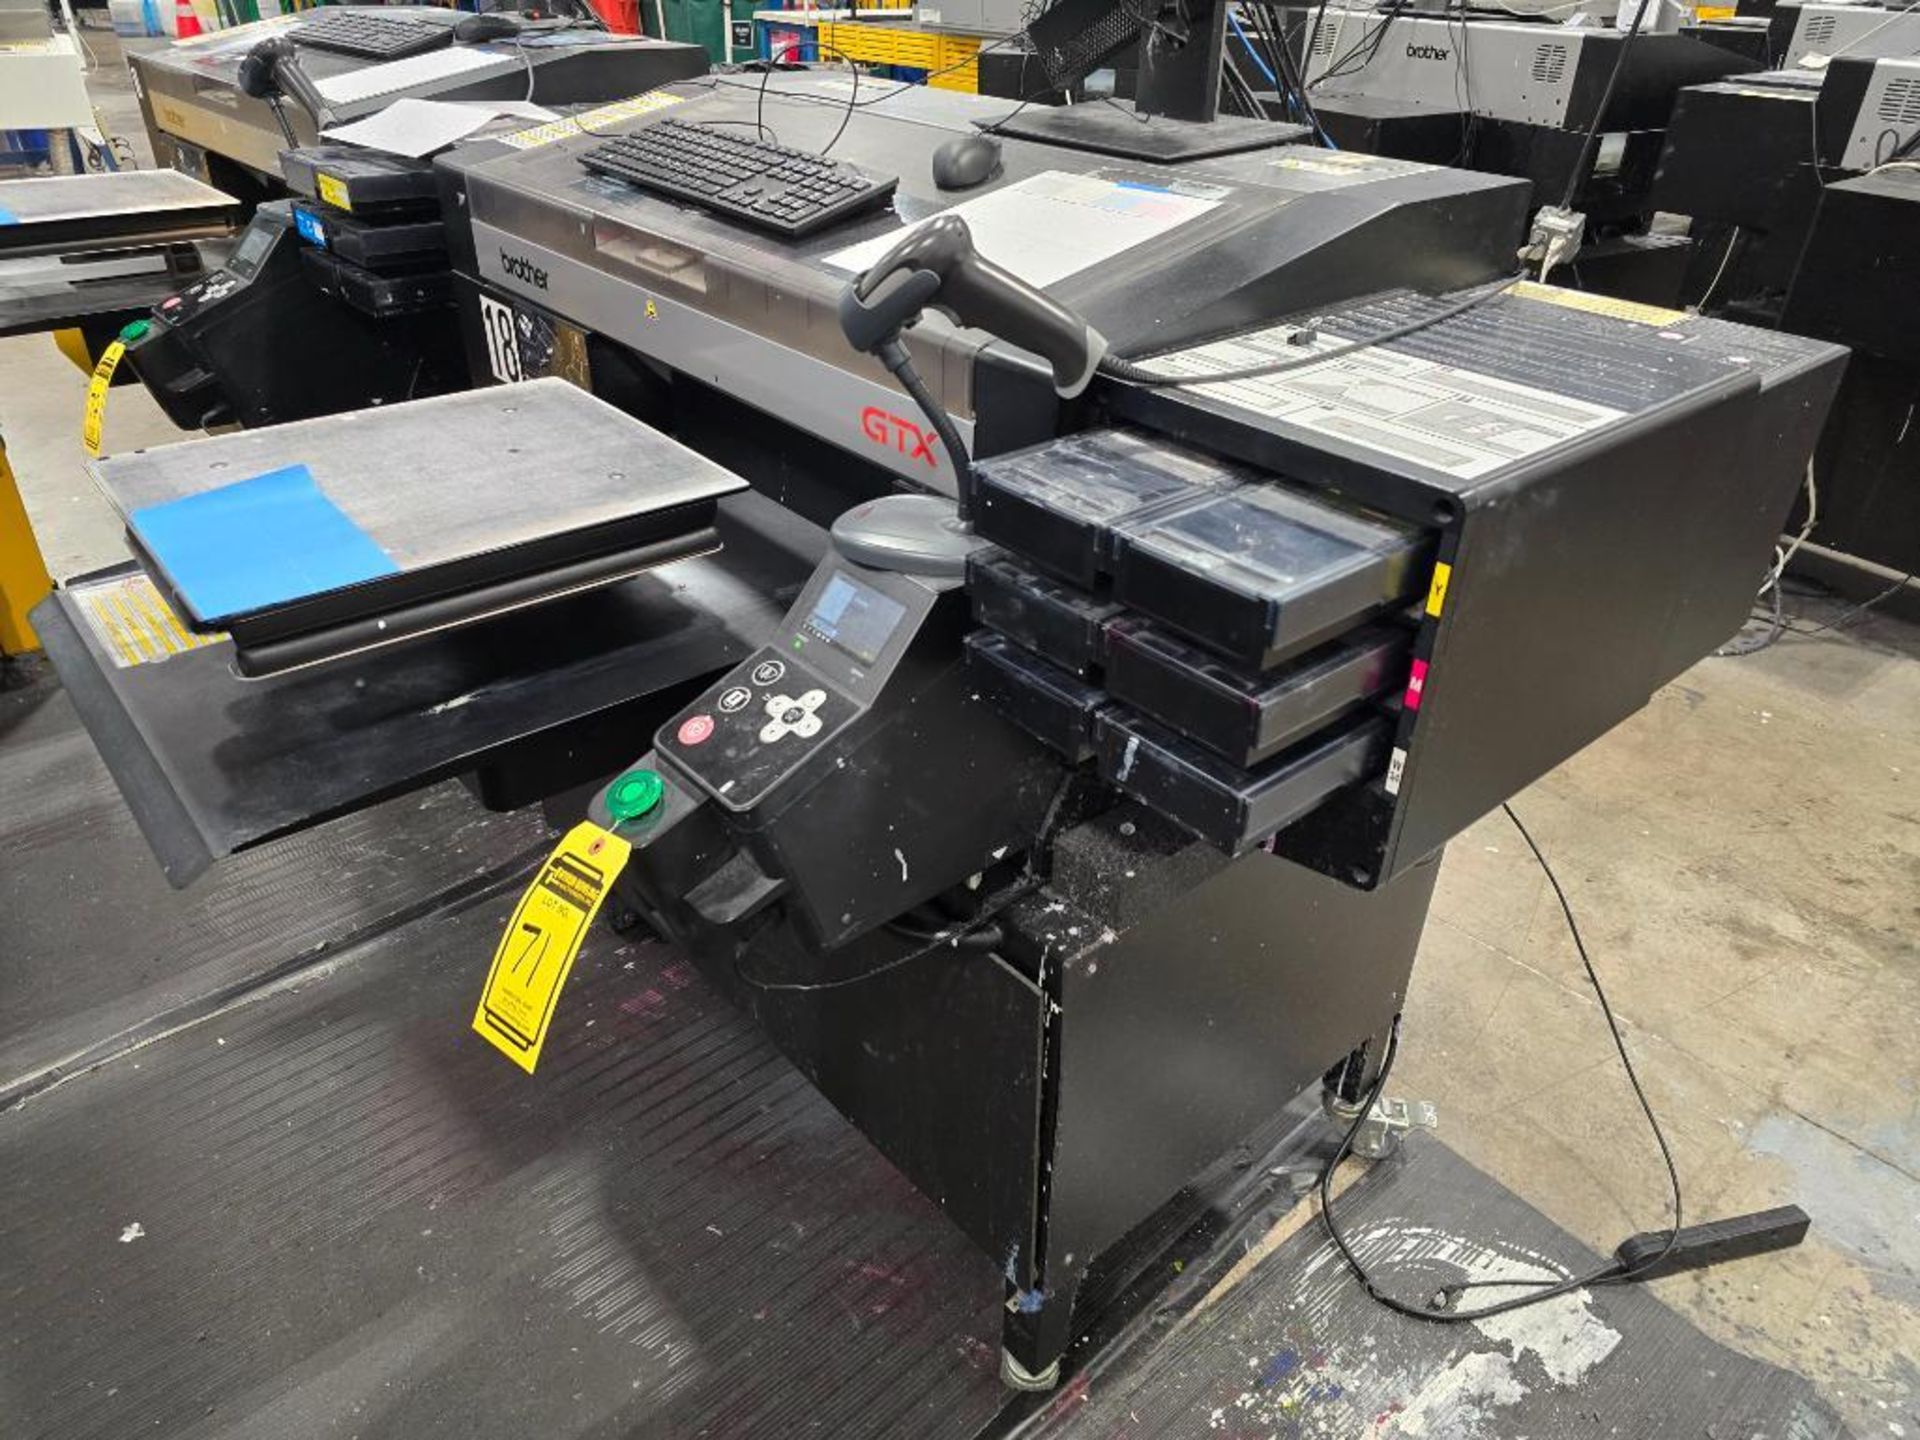 2018 Brother GTX-422 DTG (Direct to Garment) Printer, Twin Head, 6-Color, Water Based Pigmented Ink, - Image 3 of 11